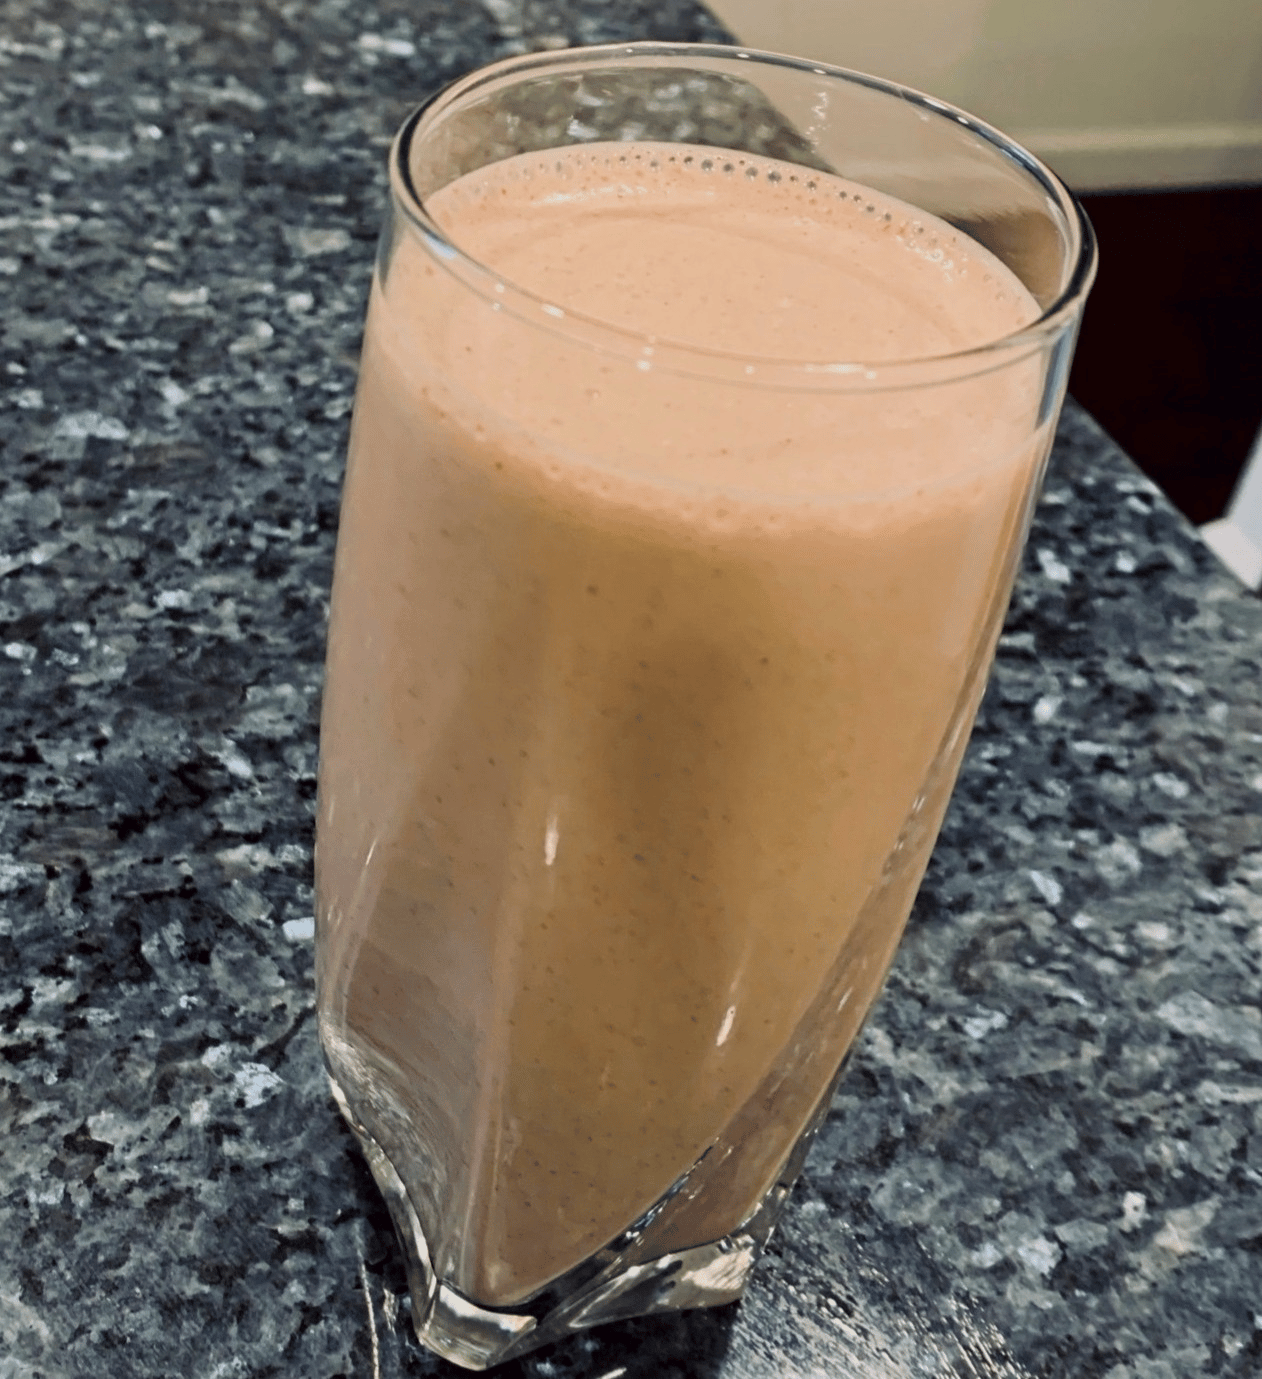 The Best Low Carb Chocolate Peanut Butter Protein Smoothie